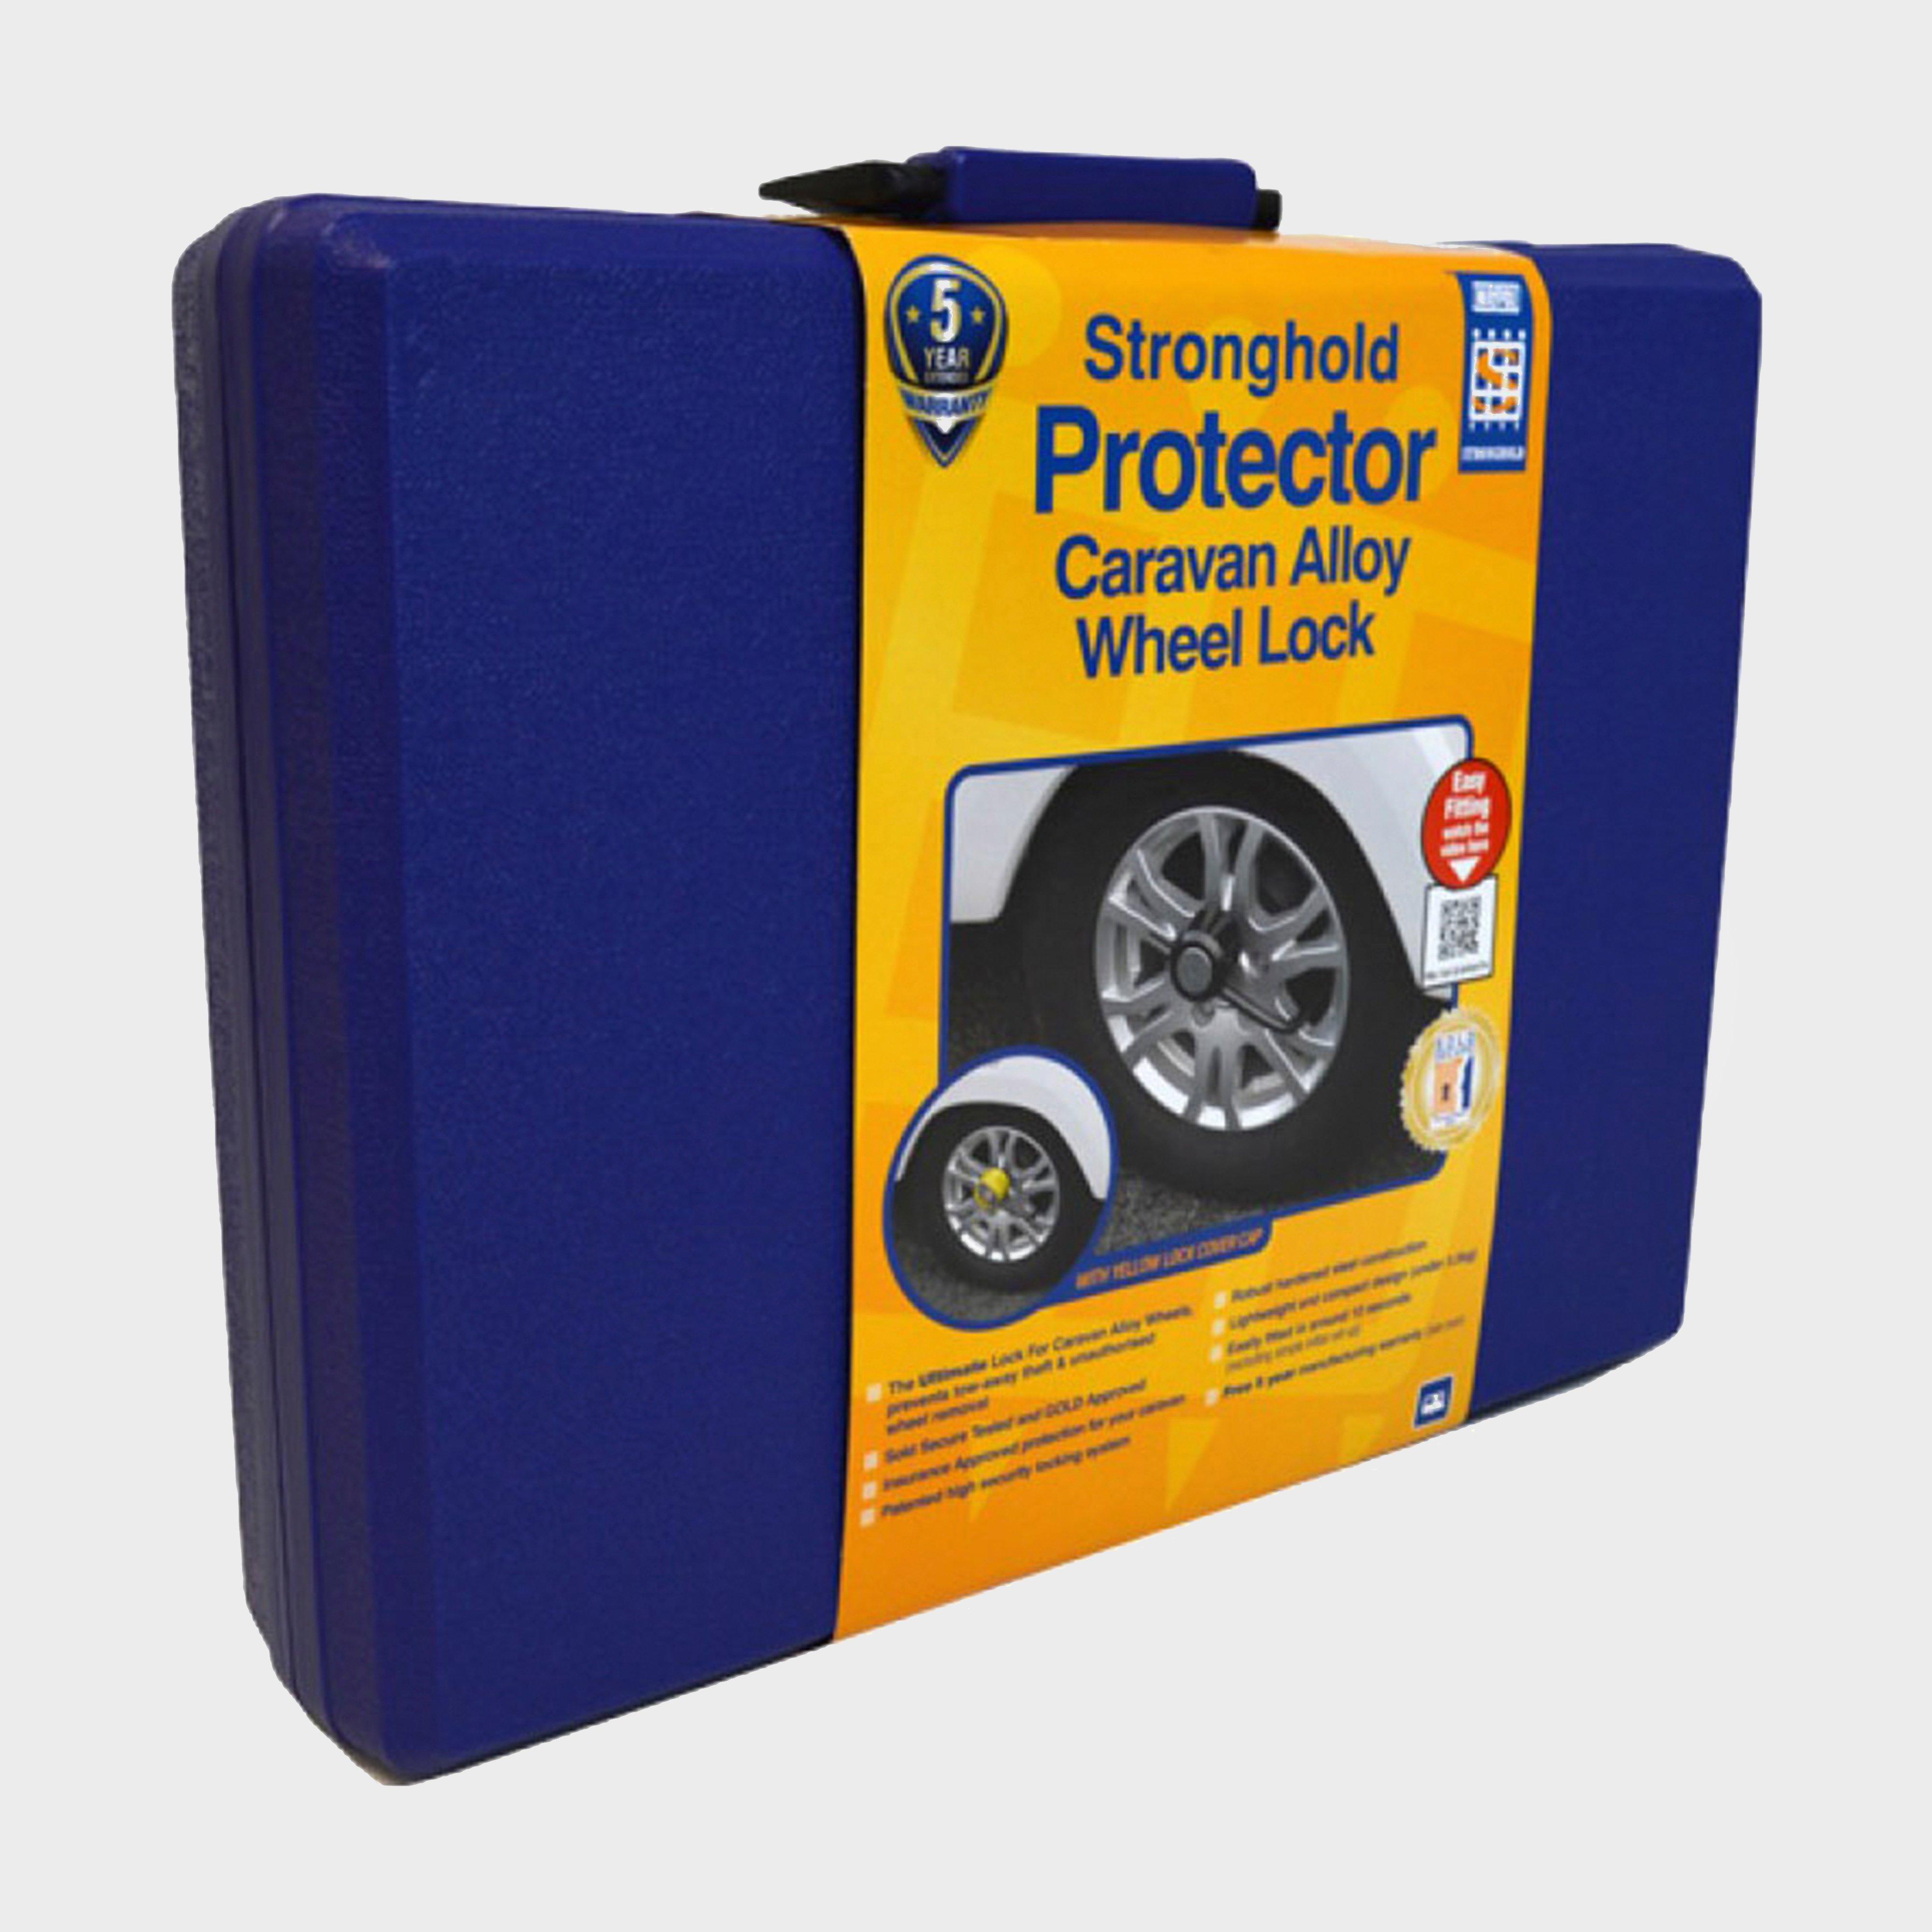 Stronghold Stronghold Protector Caravan Alloy Wheel Lock - Blue, Blue